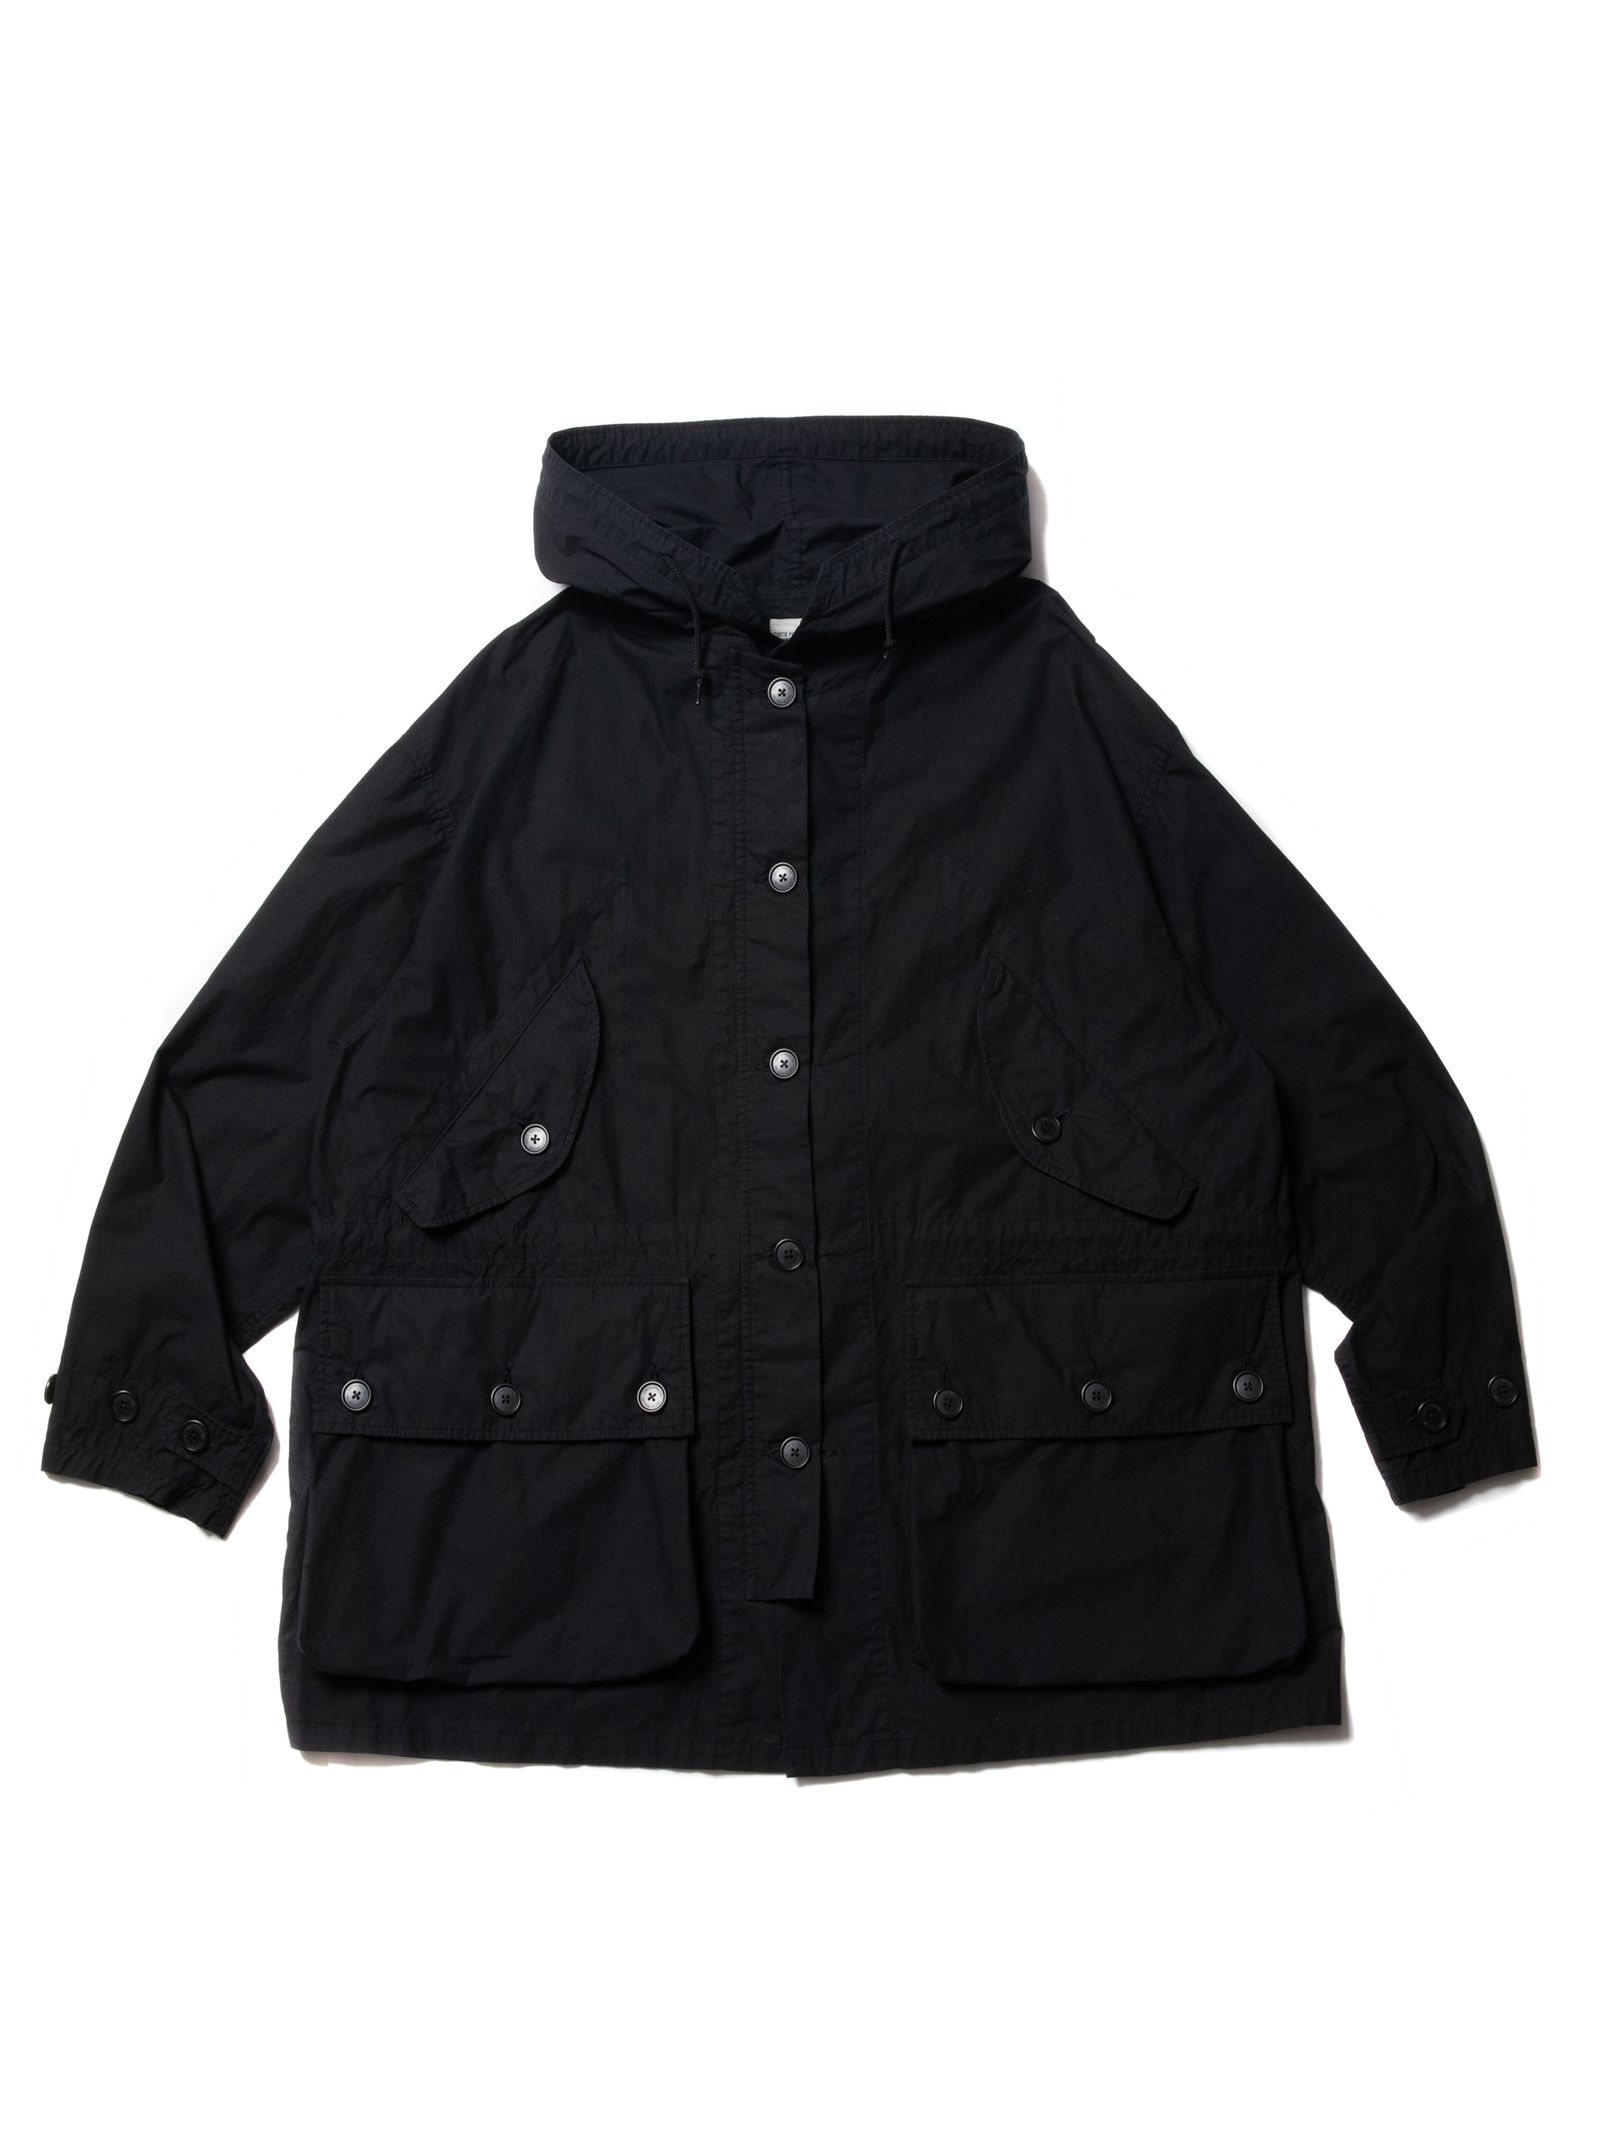 COOTIE PRODUCTIONS - GARMENT DYED UTILITY OVER COAT (BLACK